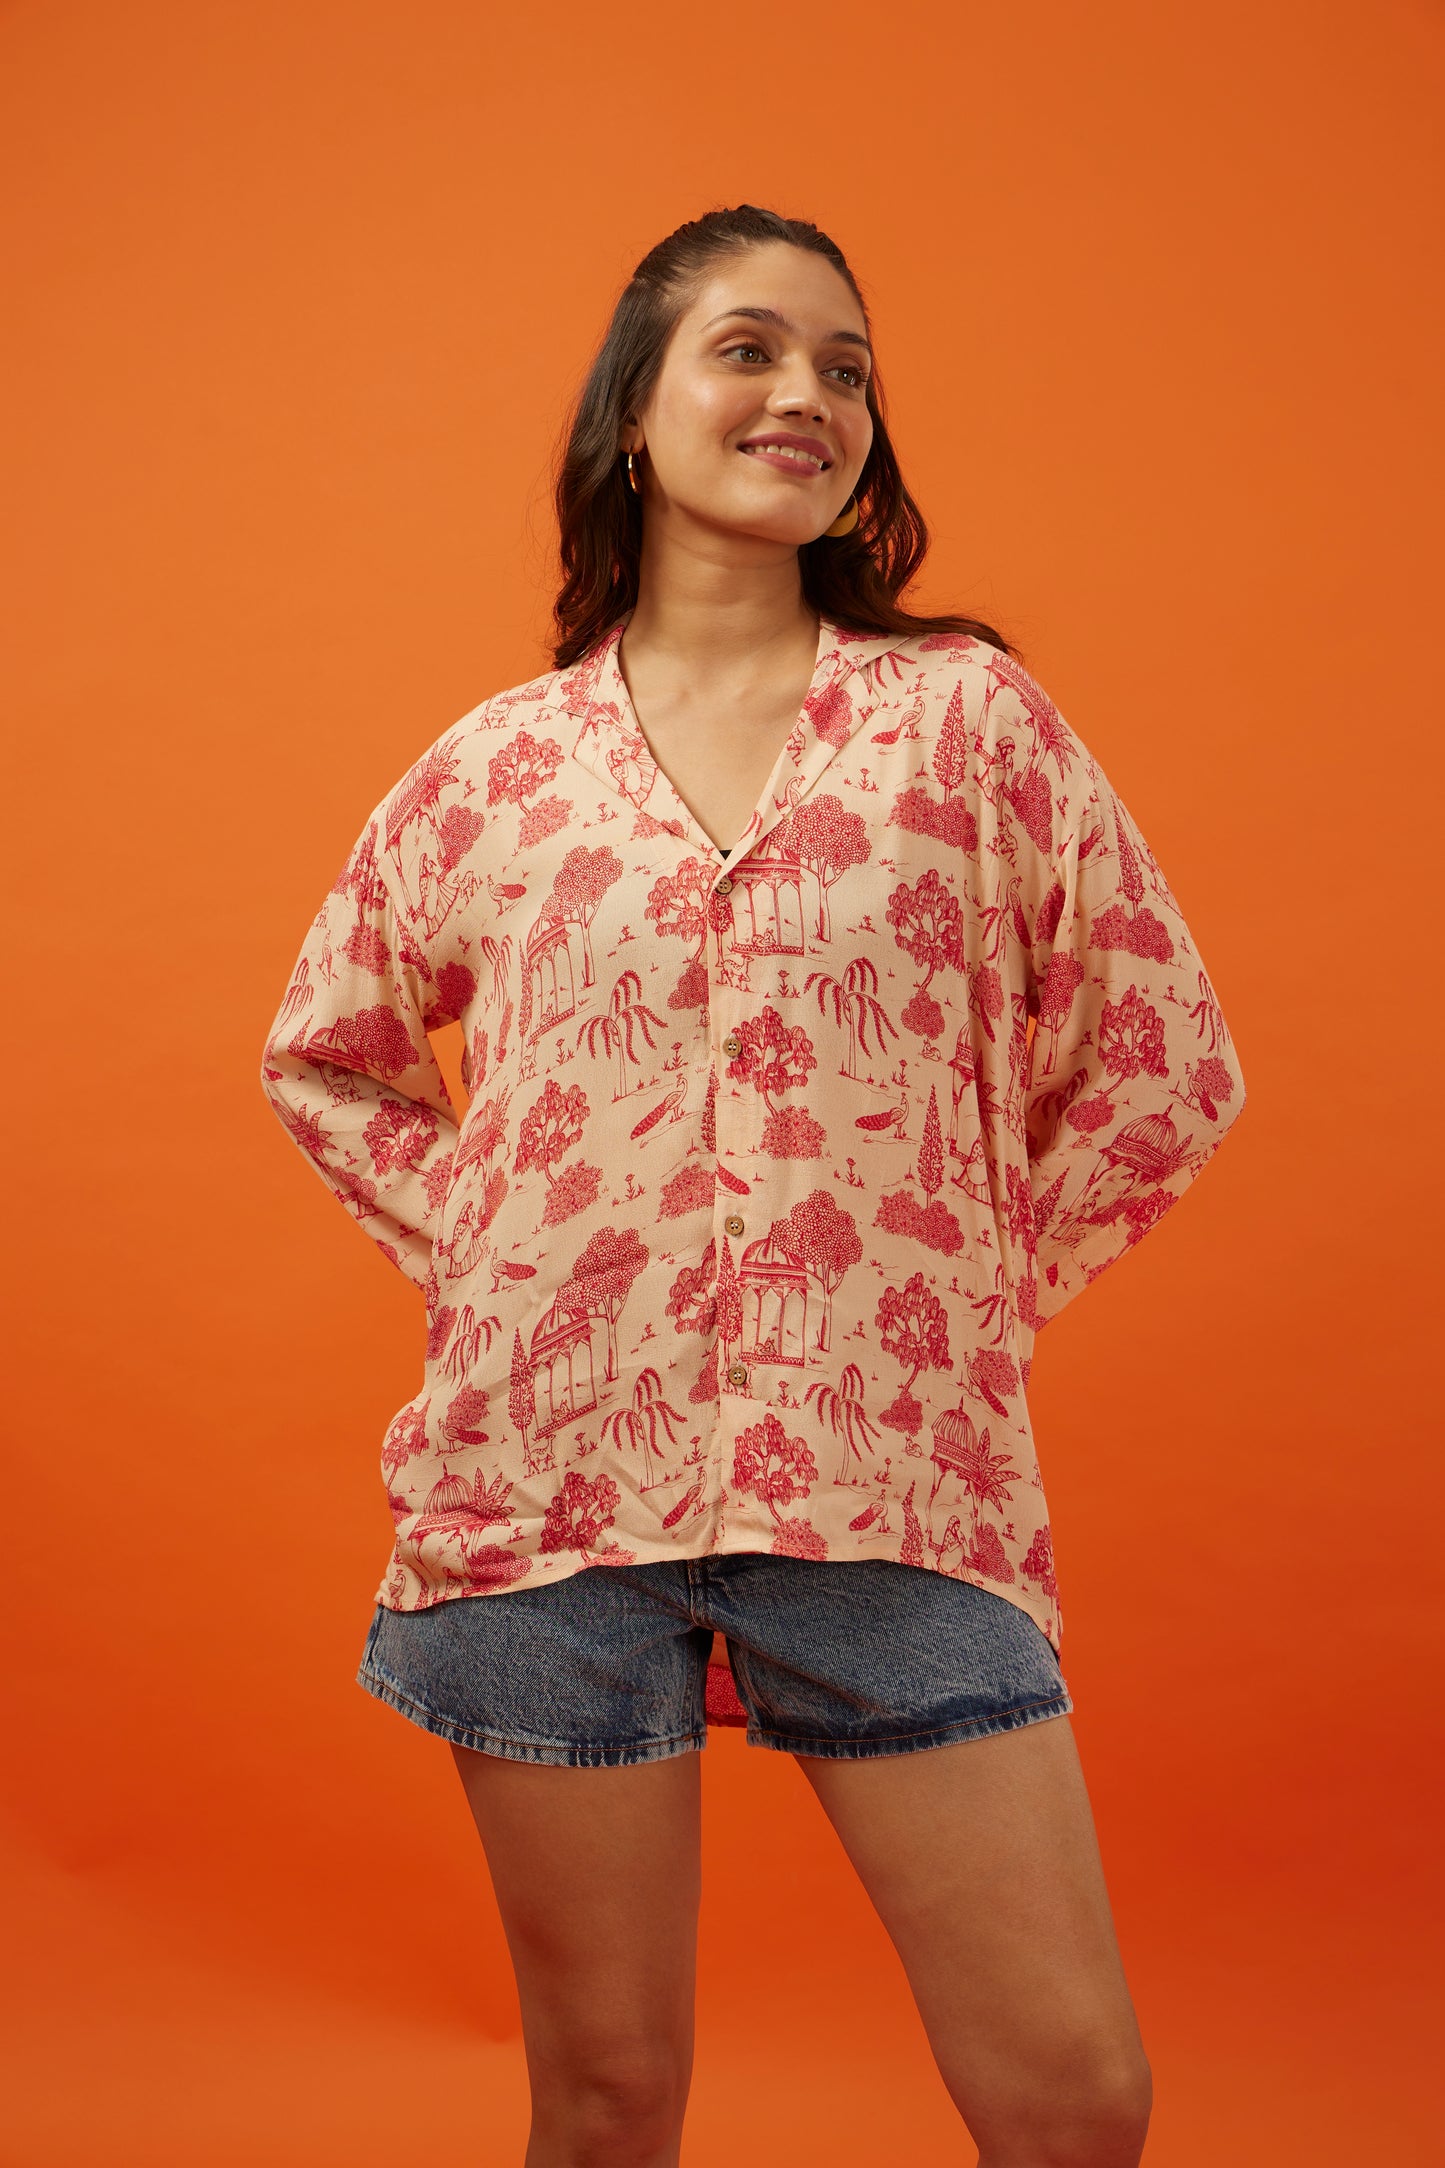 Chic young woman sporting a Hypsway oversized bohemian blouse with intricate Indian palace print in shades of coral and beige, paired with casual denim shorts, exuding a relaxed yet fashionable vibe perfect for a versatile wardrobe.